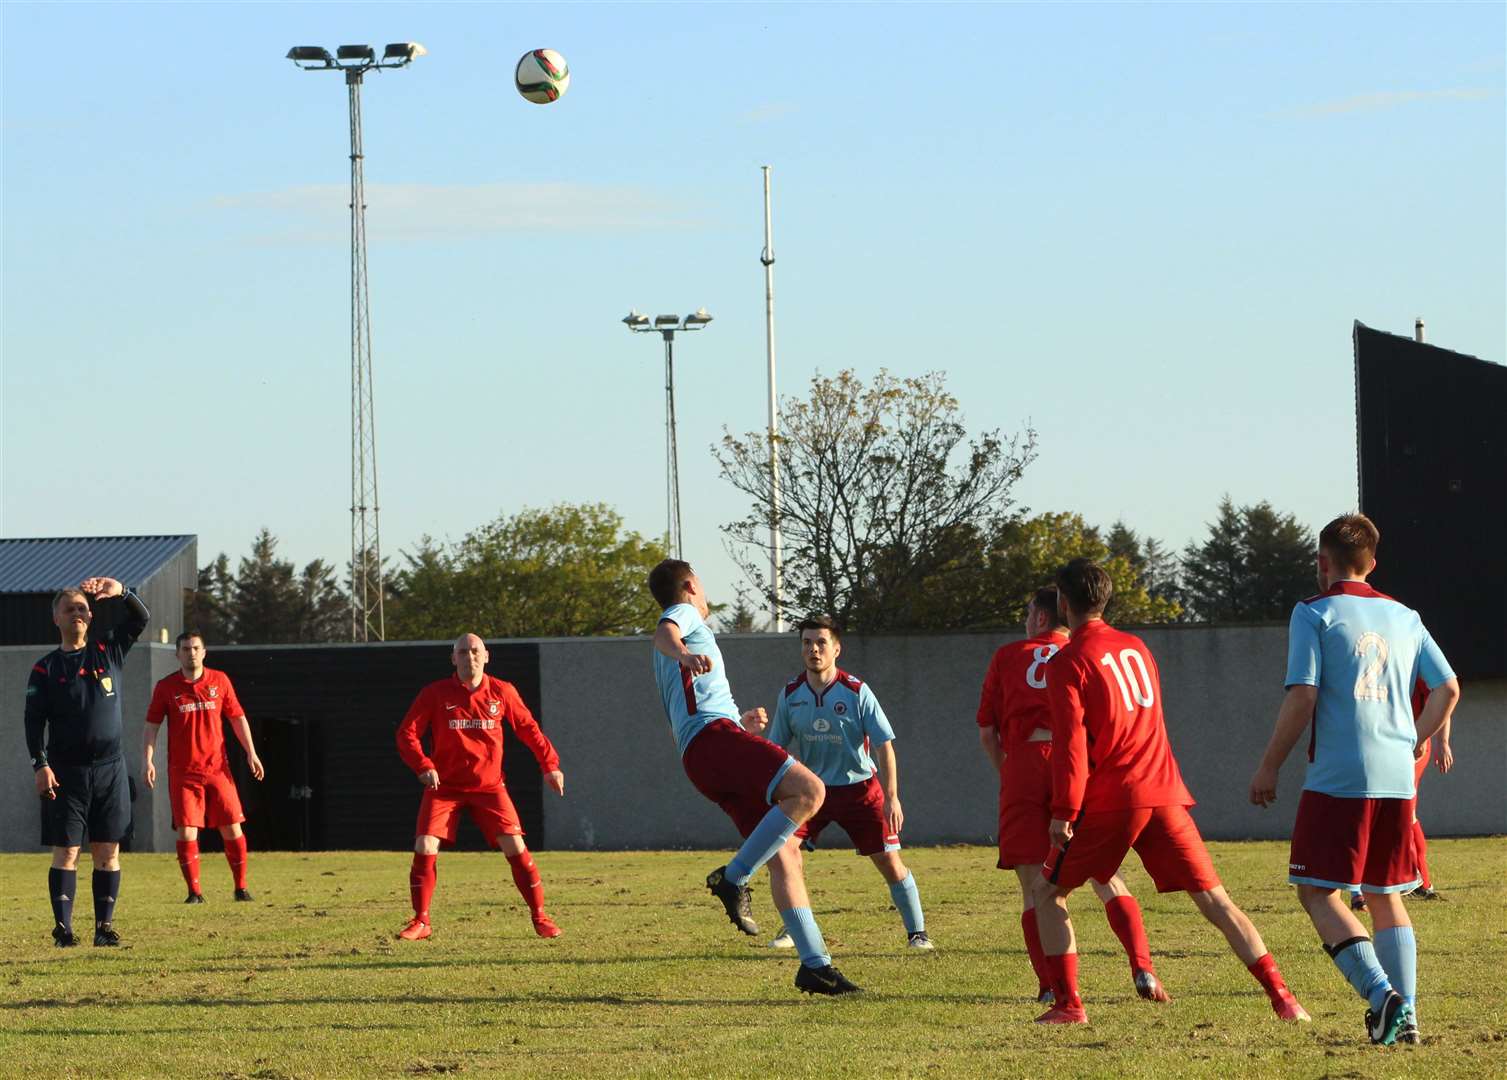 The ball goes sky high as Wick Groats and Pentland United battle it out at the Upper Bignold.